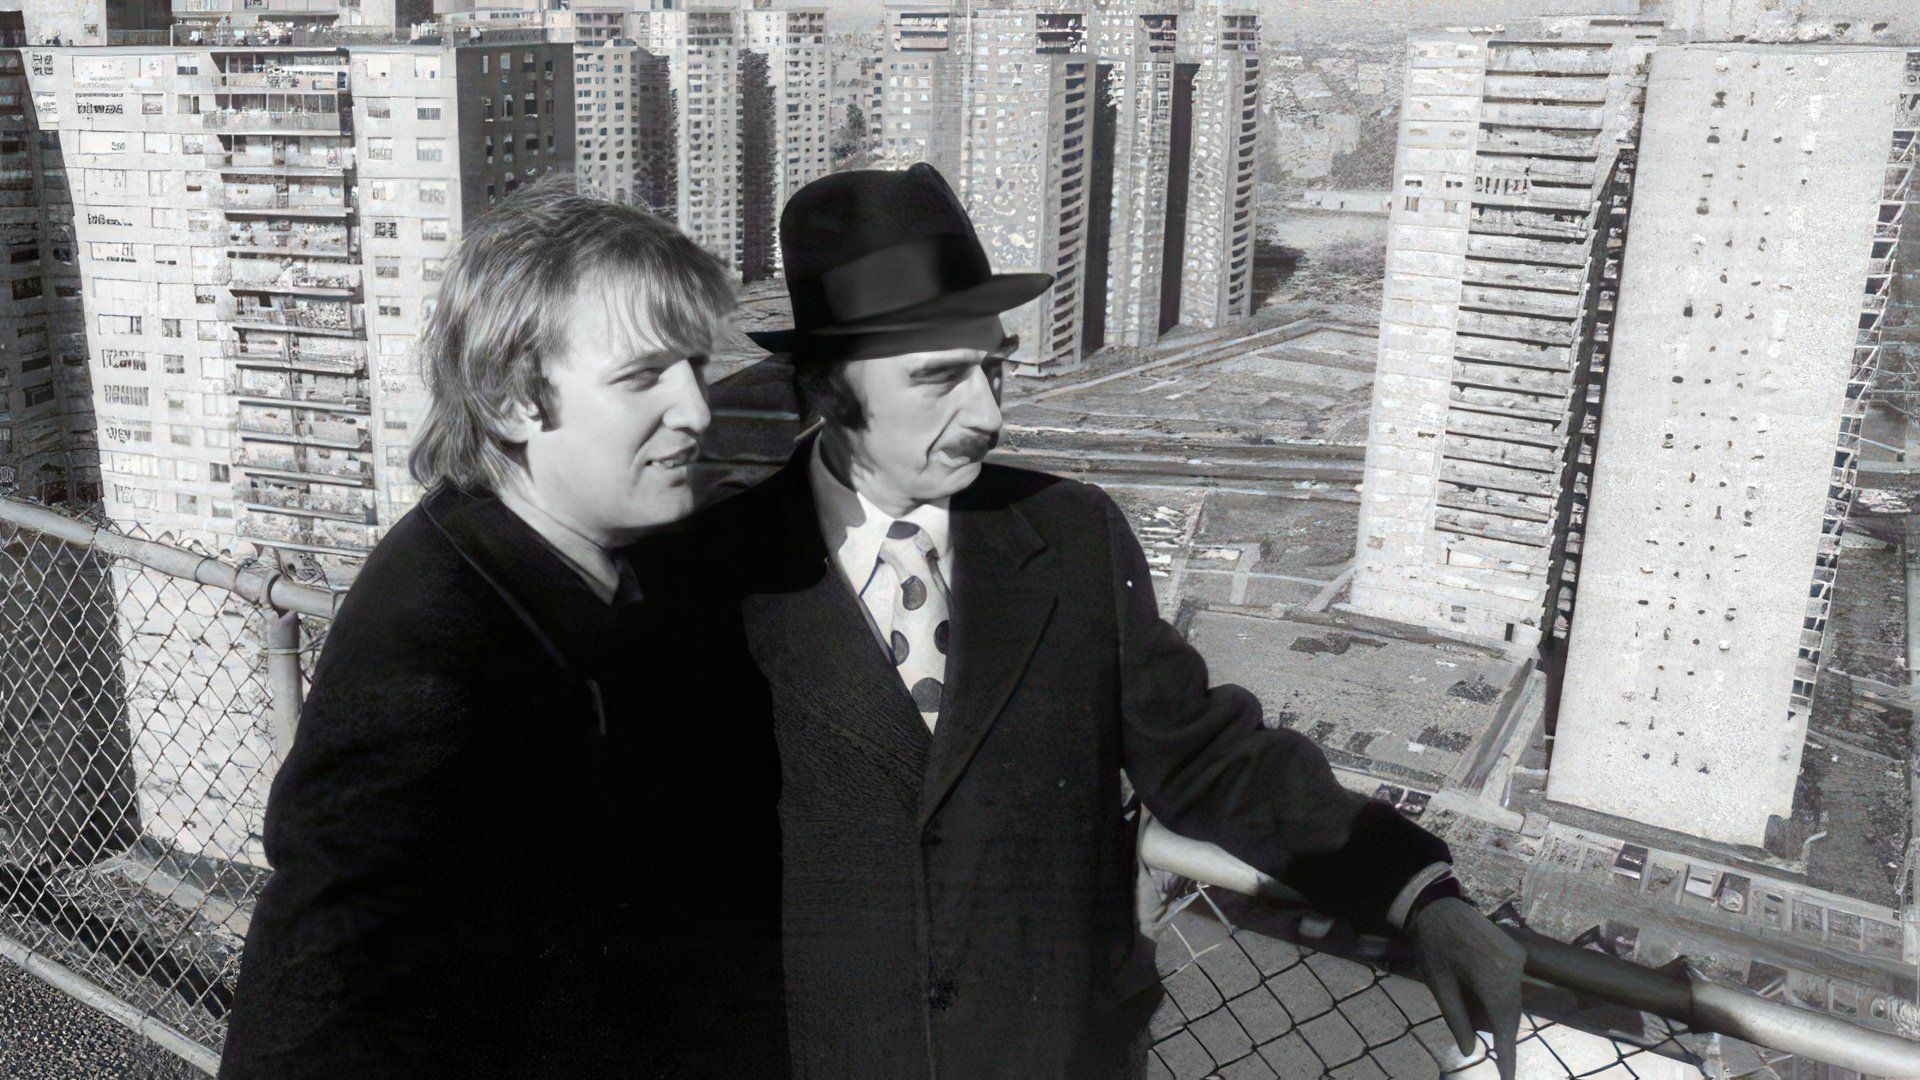 Donald Trump and Fred Trump ‒ the legendary father and son